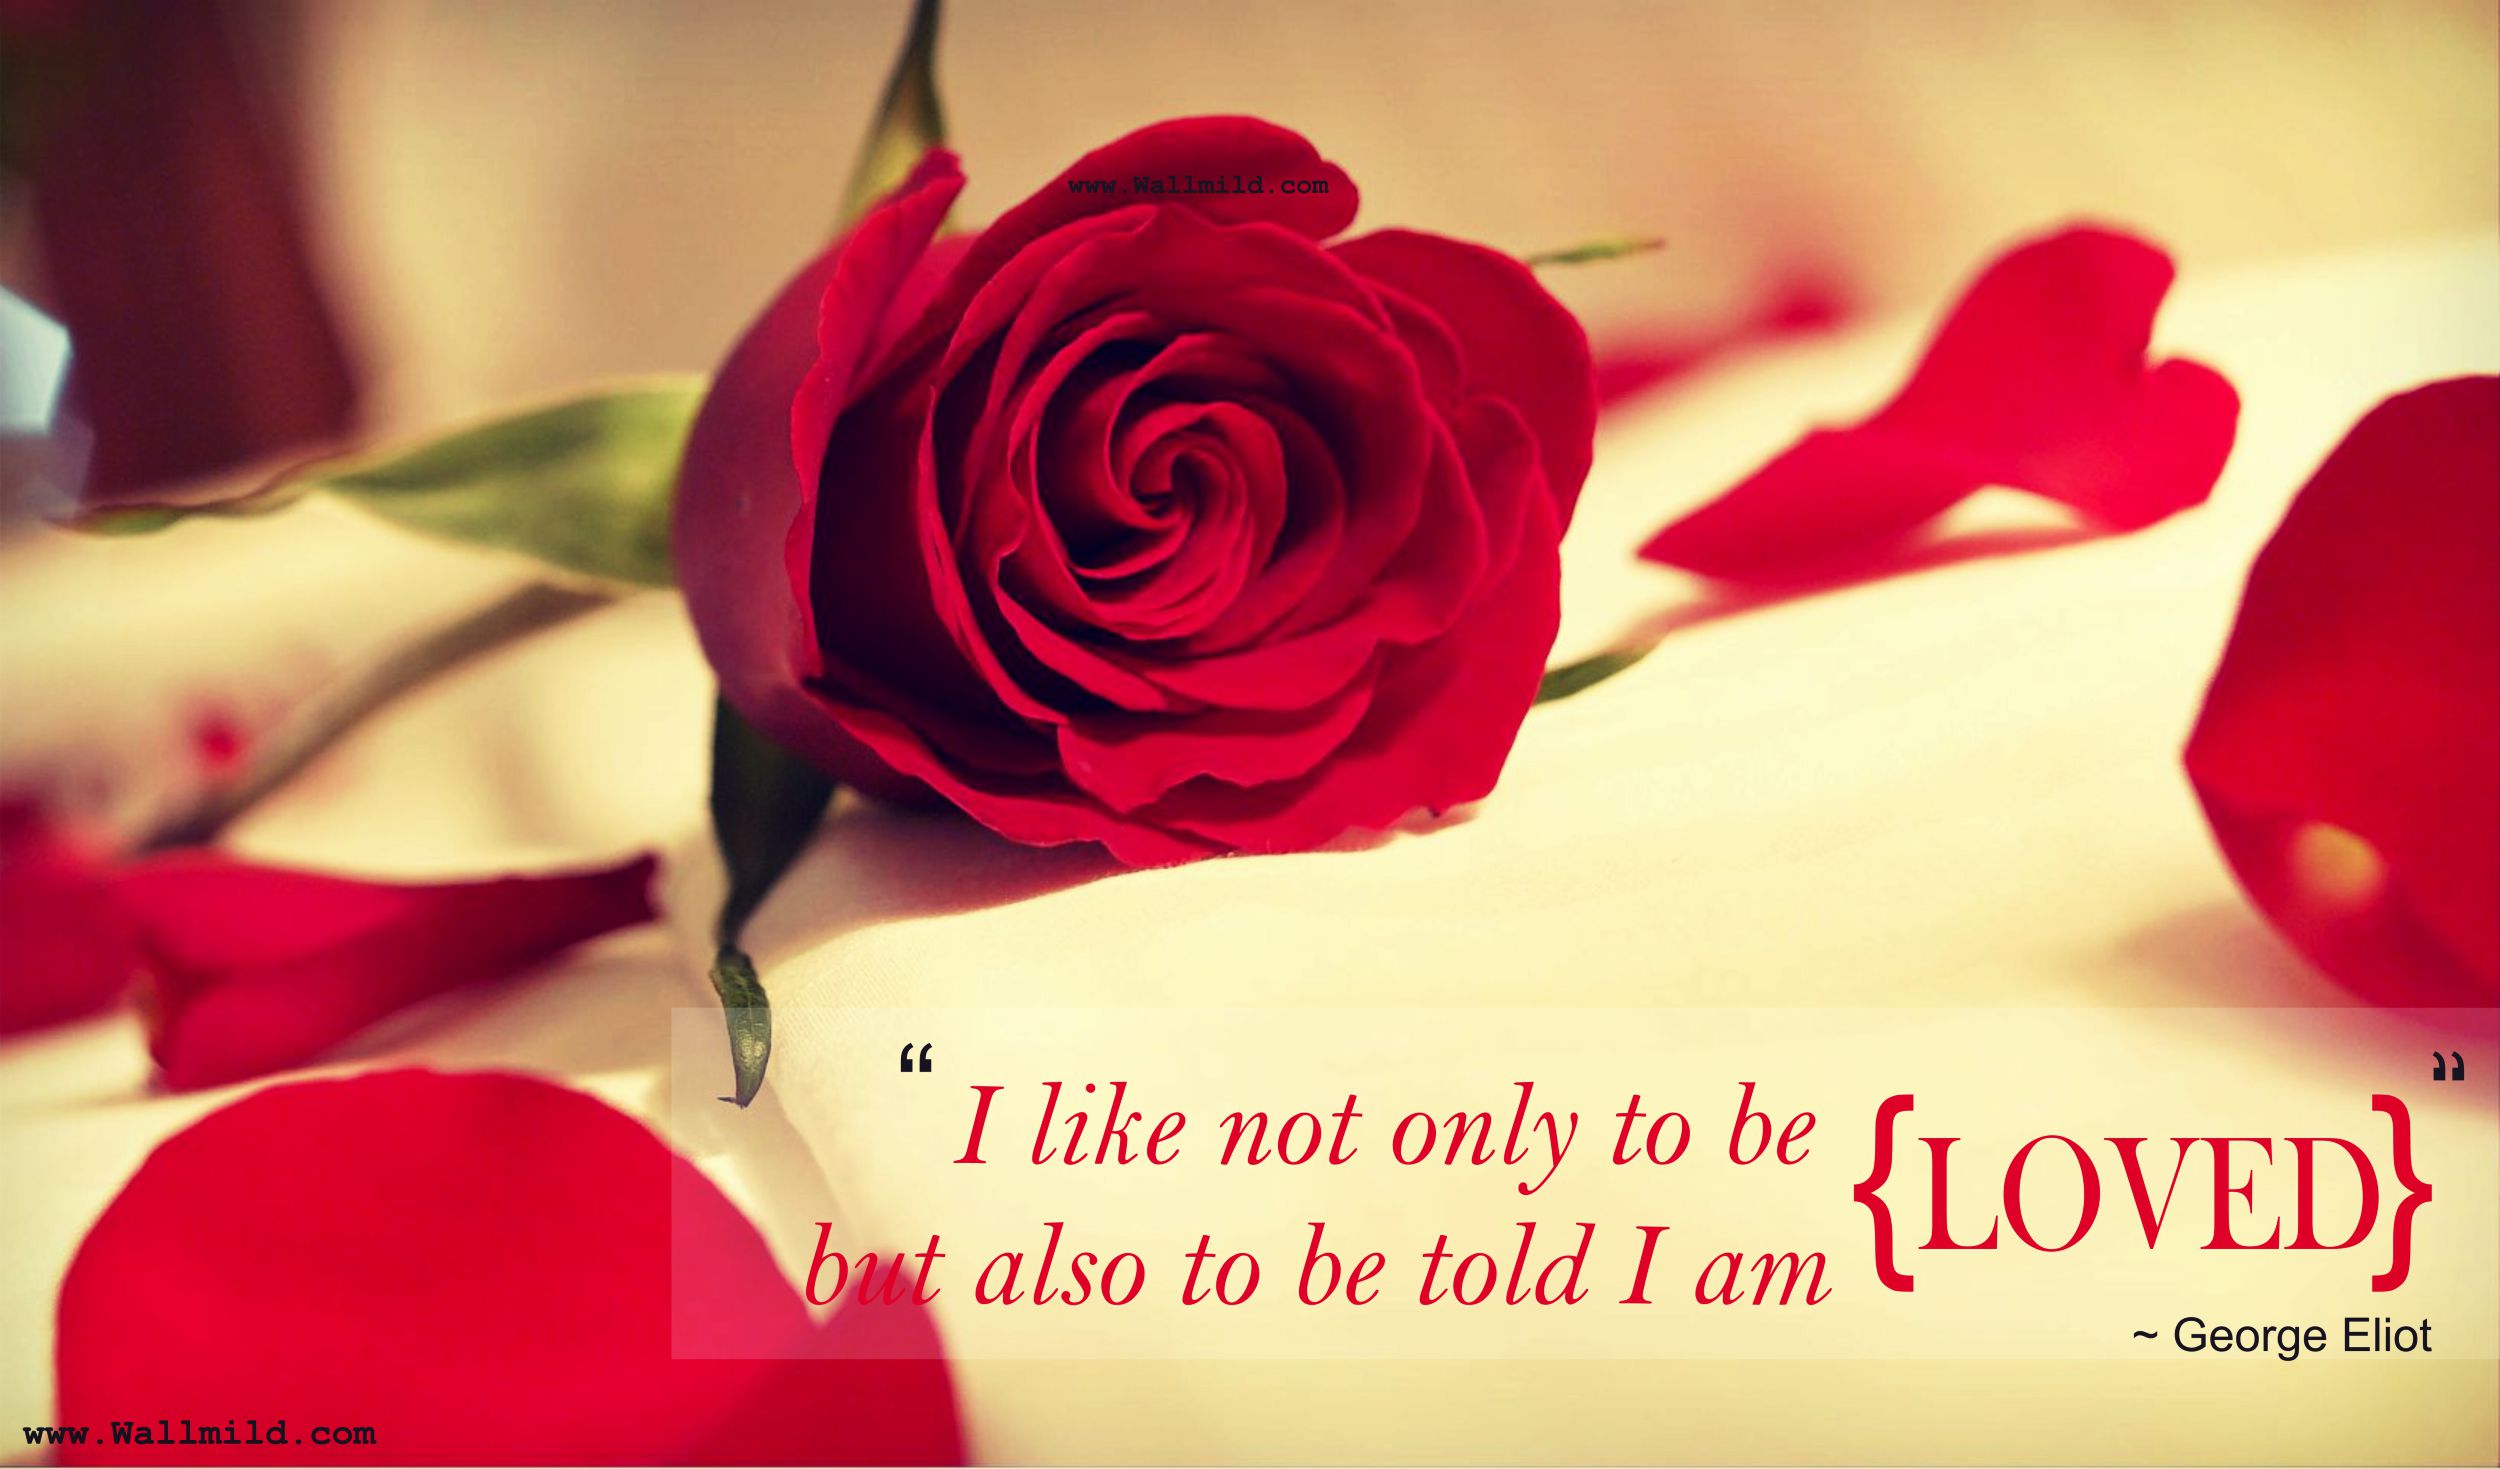 Cute Love Quotes HD Wallpaper 842 Best Wallpapers Cute Love Quotes HD 2500x1469